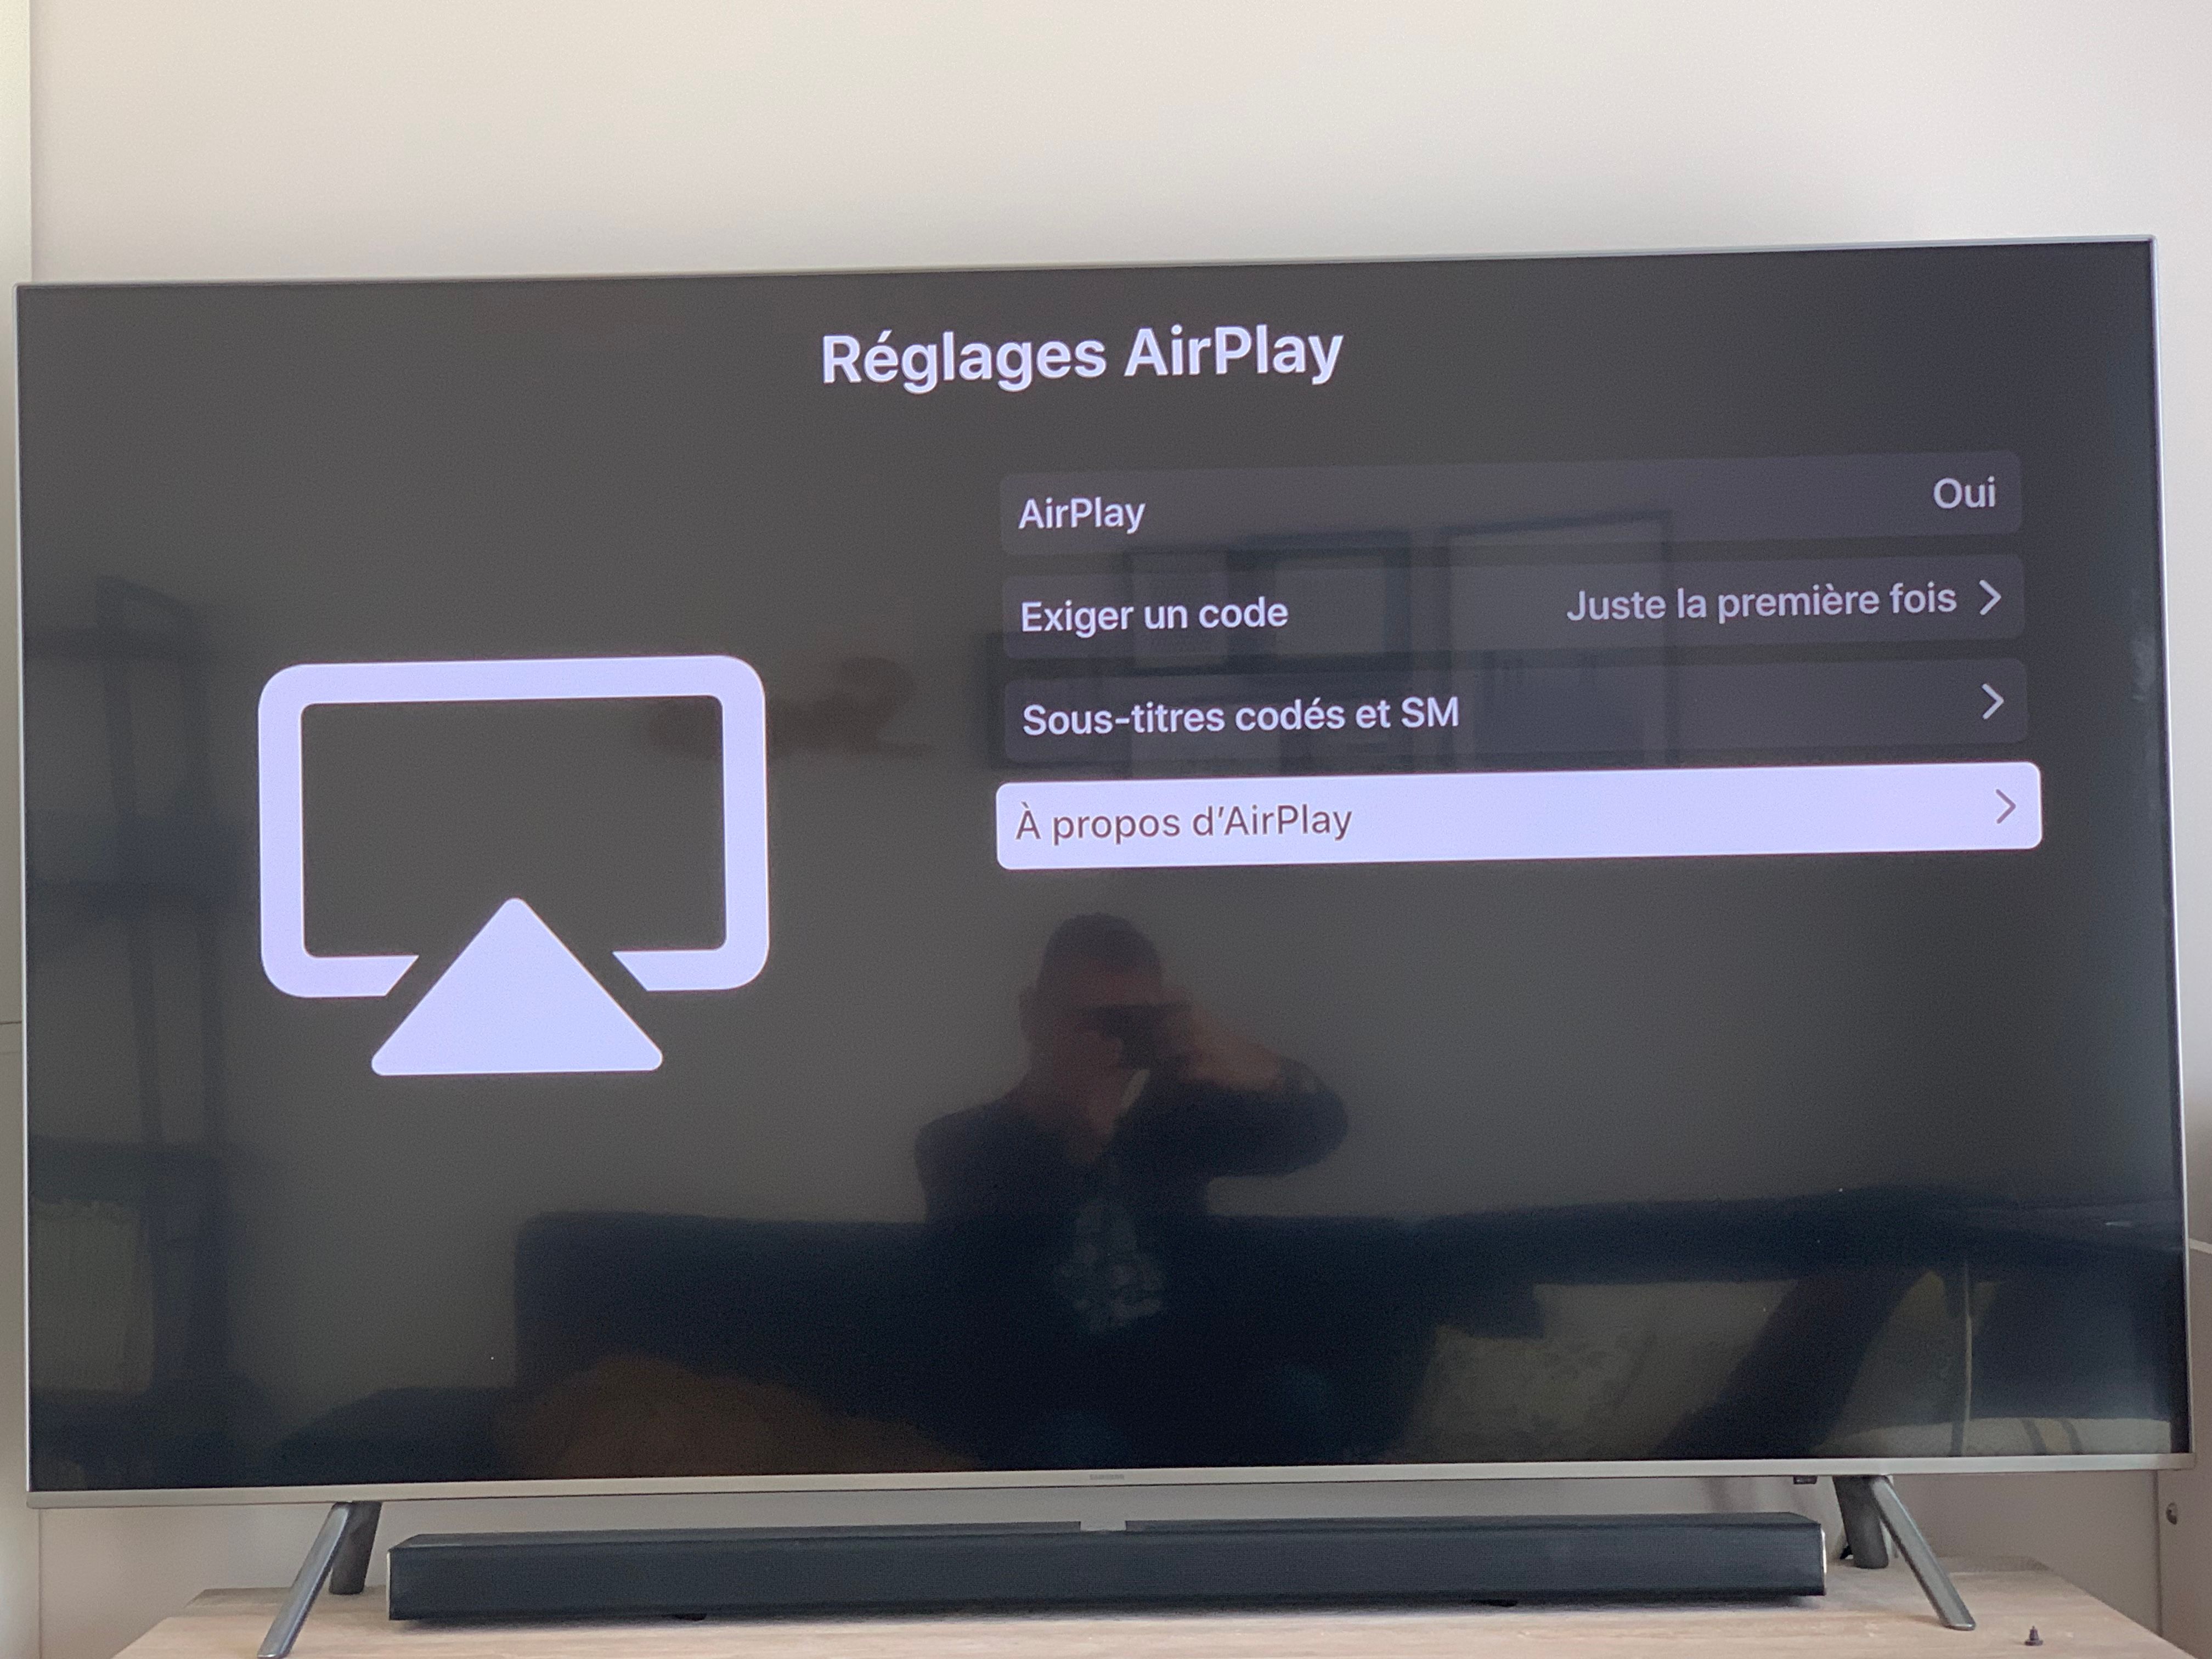 Solved: AirPlay 5 problem - Page 5 - Samsung Community